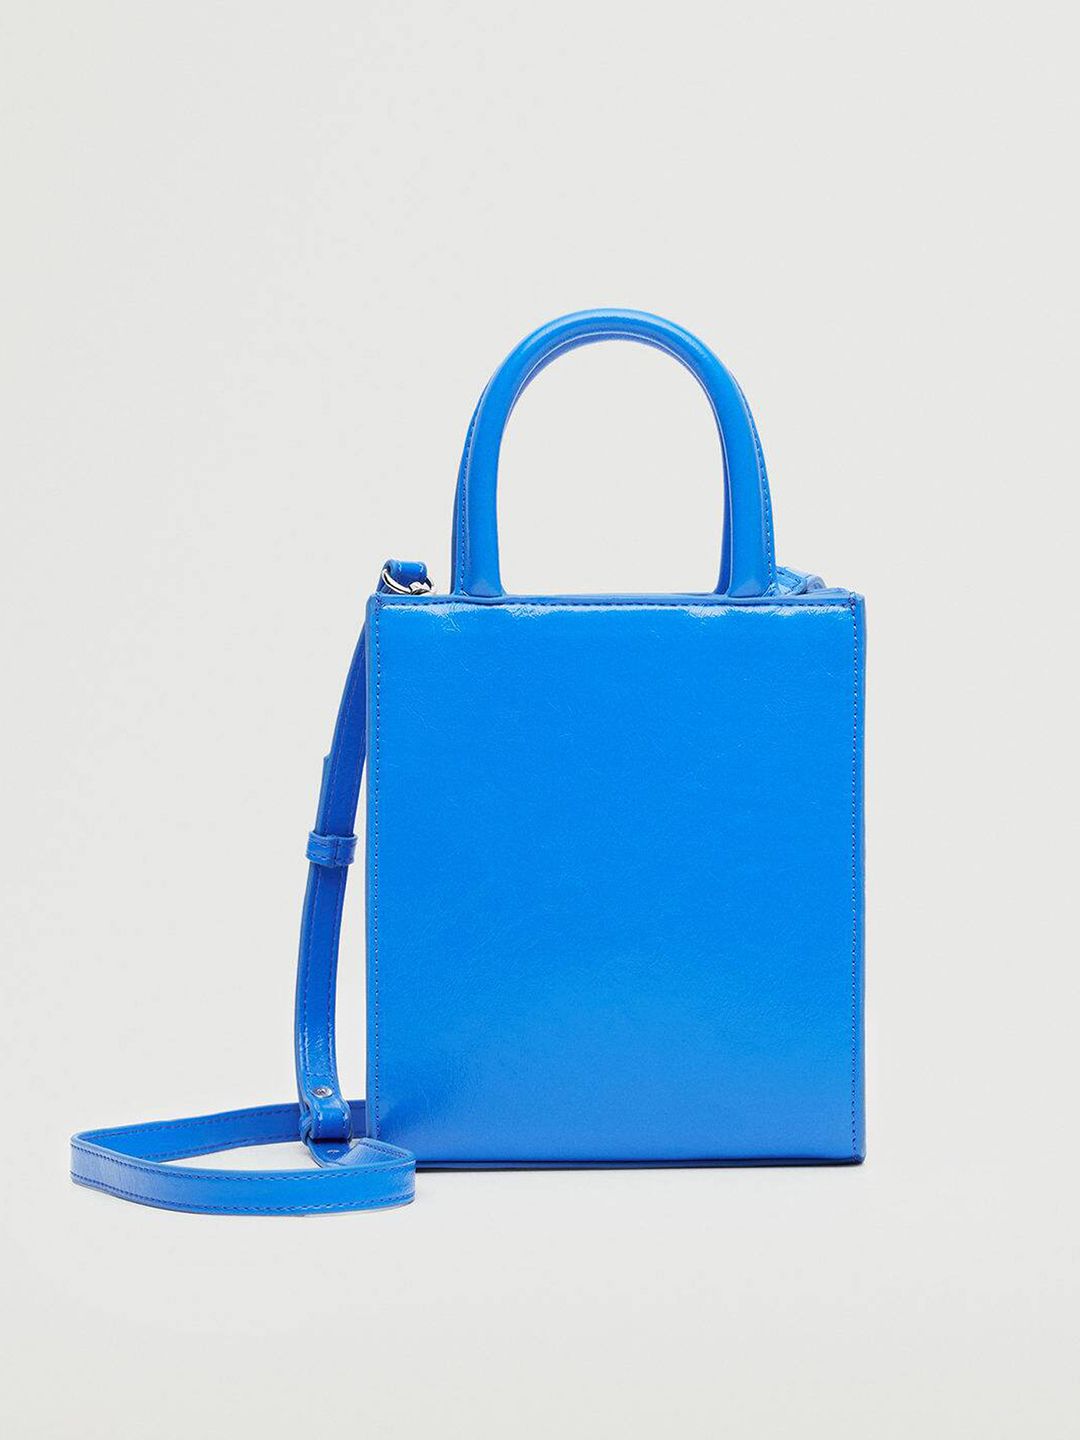 MANGO Women Blue Solid Structured Handheld Bag Price in India